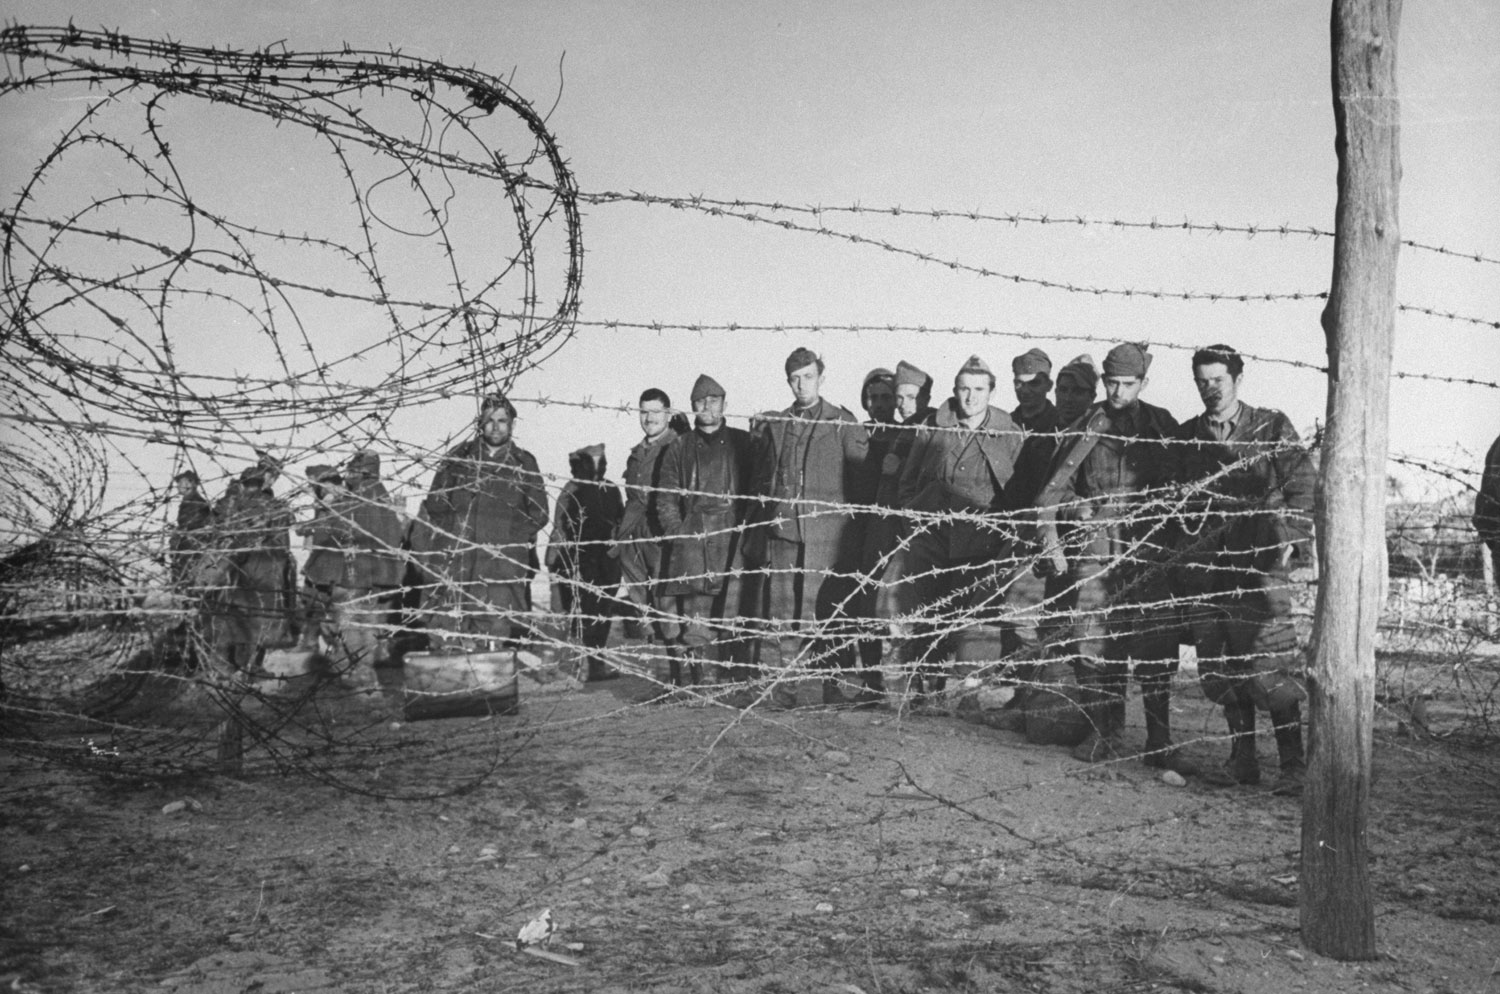 Barbed wire enclosure holds Axis prisoners taken during the Allied assault on German positions near Sened, Tunisia, 1943.